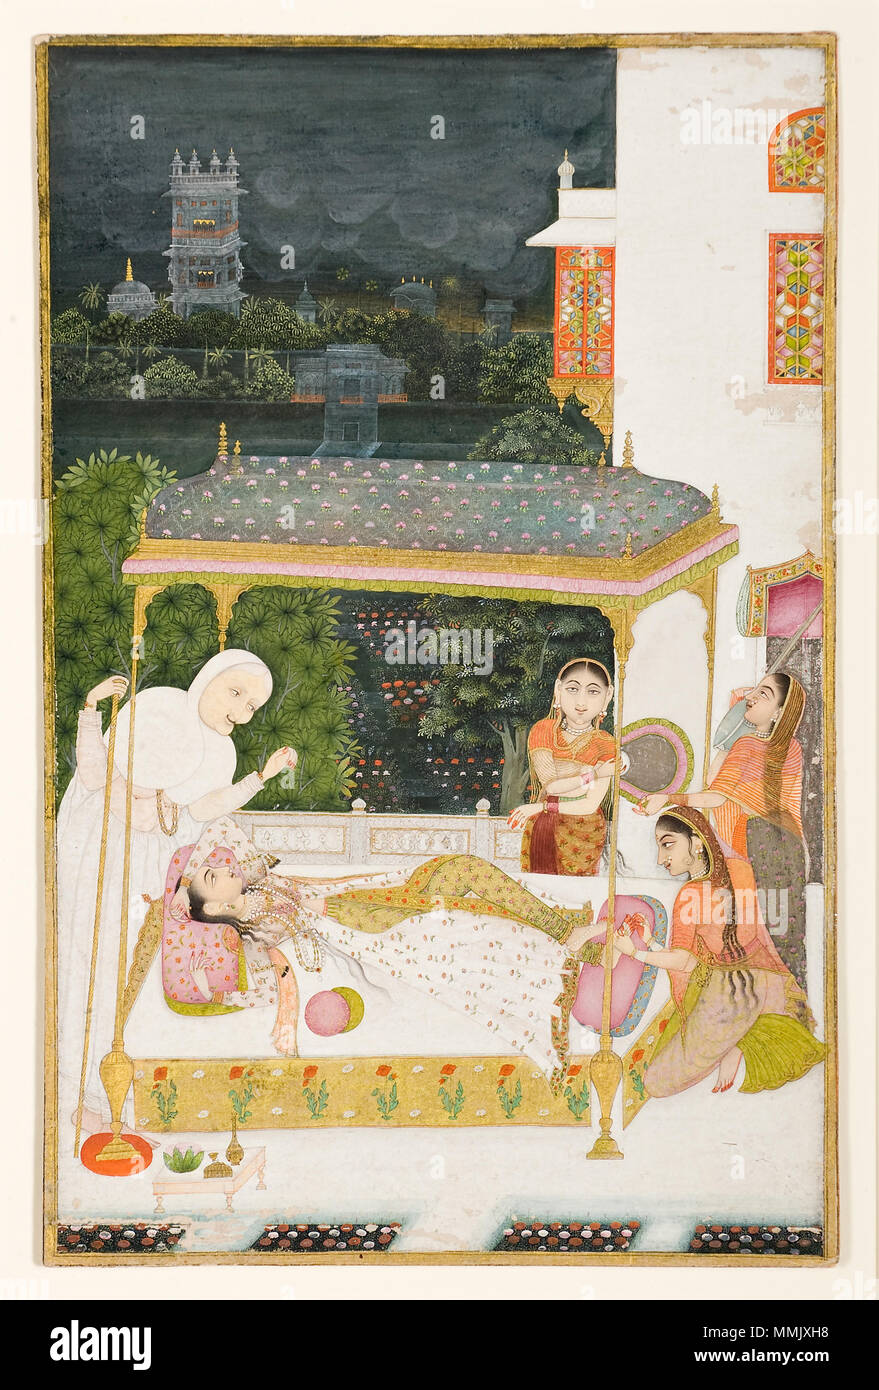 . English: Display Artist: Kasam, Son of Gul Muhammad Creation Date: 1749 Display Dimensions: 8 21/32 in. x 5 9/16 in. (22 cm x 14.1 cm) Credit Line: Edwin Binney 3rd Collection Accession Number: 1990.803 Collection: The San Diego Museum of Art  . 22 March 2010, 12:16:10. English: thesandiegomuseumofartcollection A young woman on a canopied bed outdoors on a stormy night, has her feet massaged (6124520491) Stock Photo